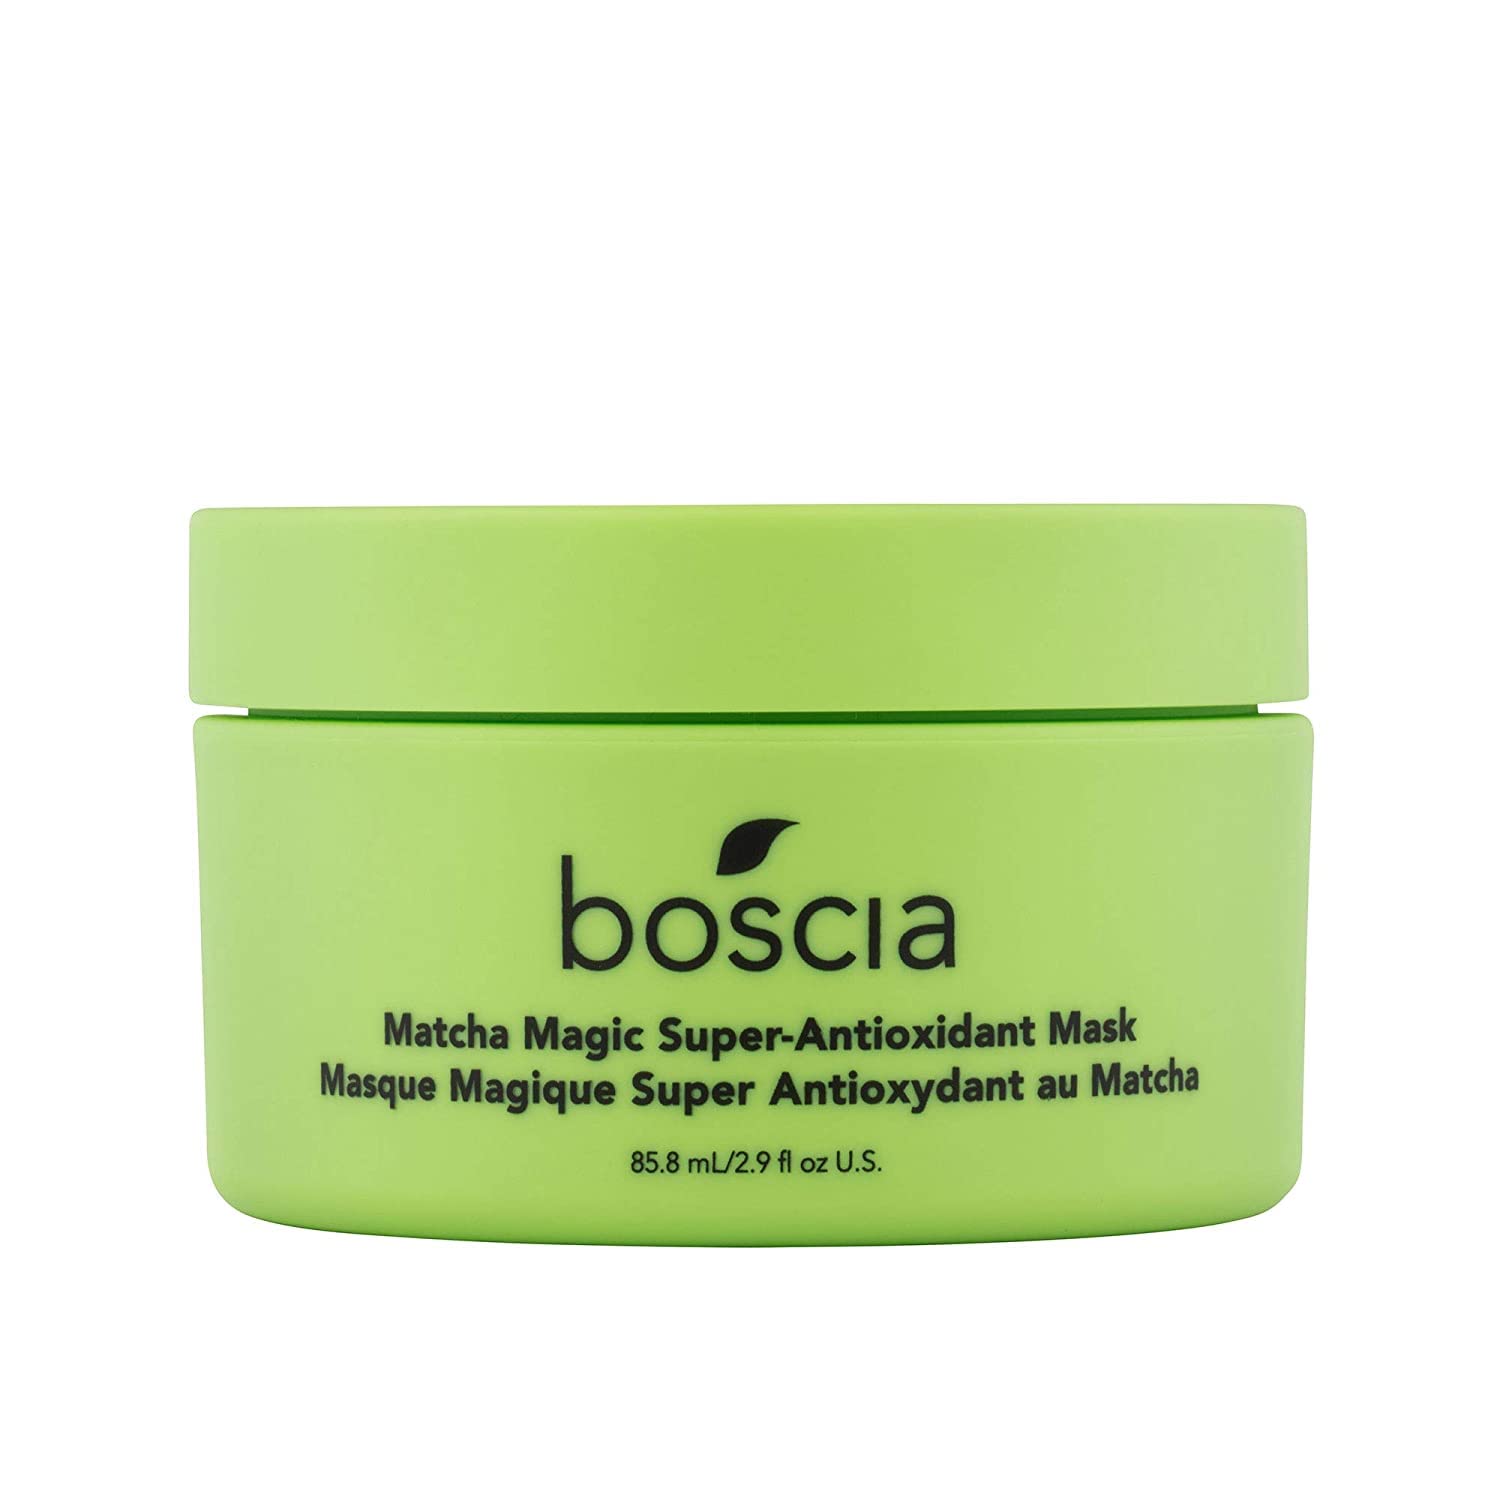 boscia MATCHA Magic Super-Antioxidant Mask - Vegan, Cruelty-Free, Natural & Clean Skin Care - Matcha Face Mask with Antioxidants - For All Skin Types - 2.9 fl oz, List Price is $38, Now Only $26.53